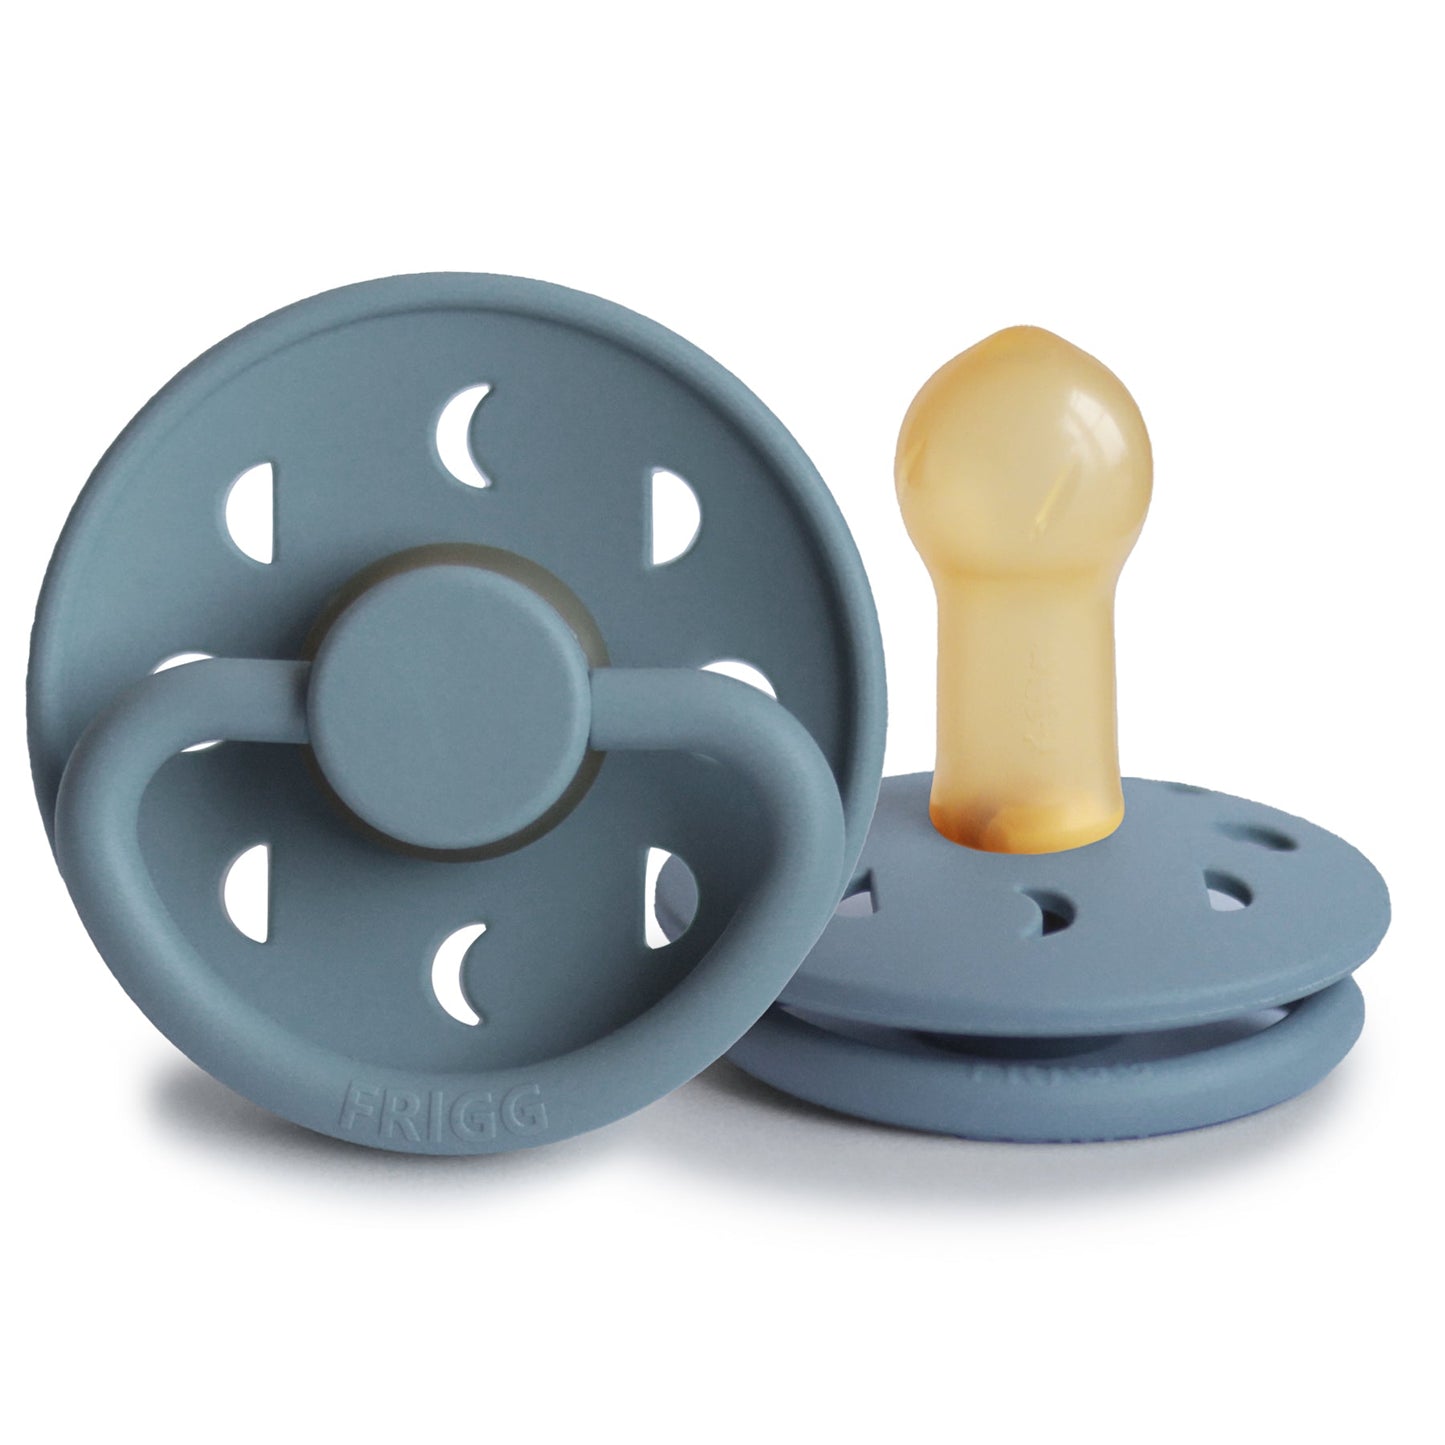 Personalized FRIGG Moon Phase Latex Baby Pacifier (1 Piece)